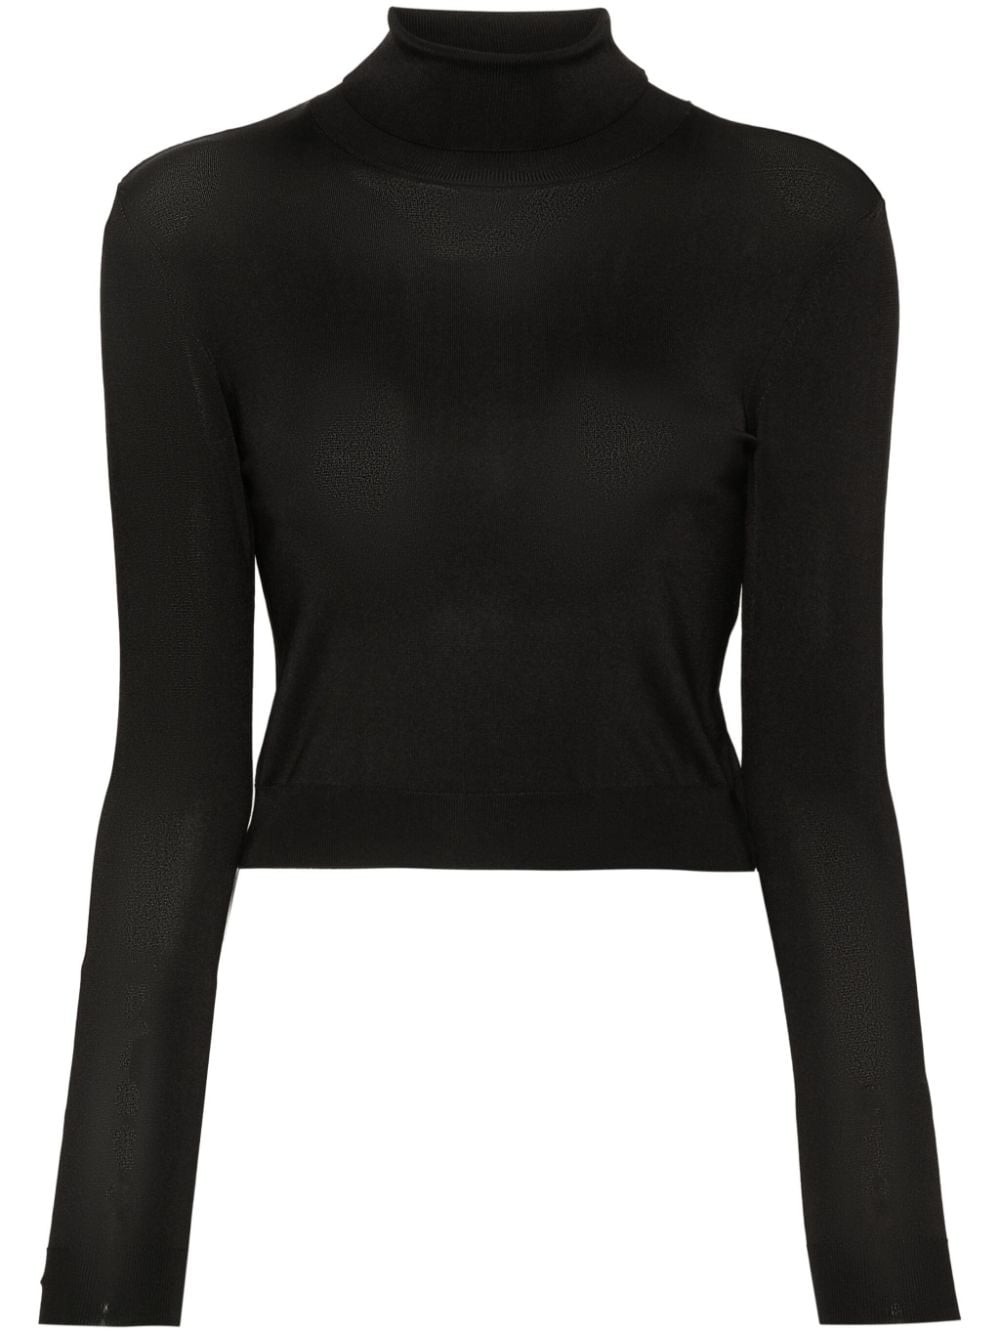 Ralph Lauren Collection Cropped-Pullover mit Rollkragen - Schwarz von Ralph Lauren Collection